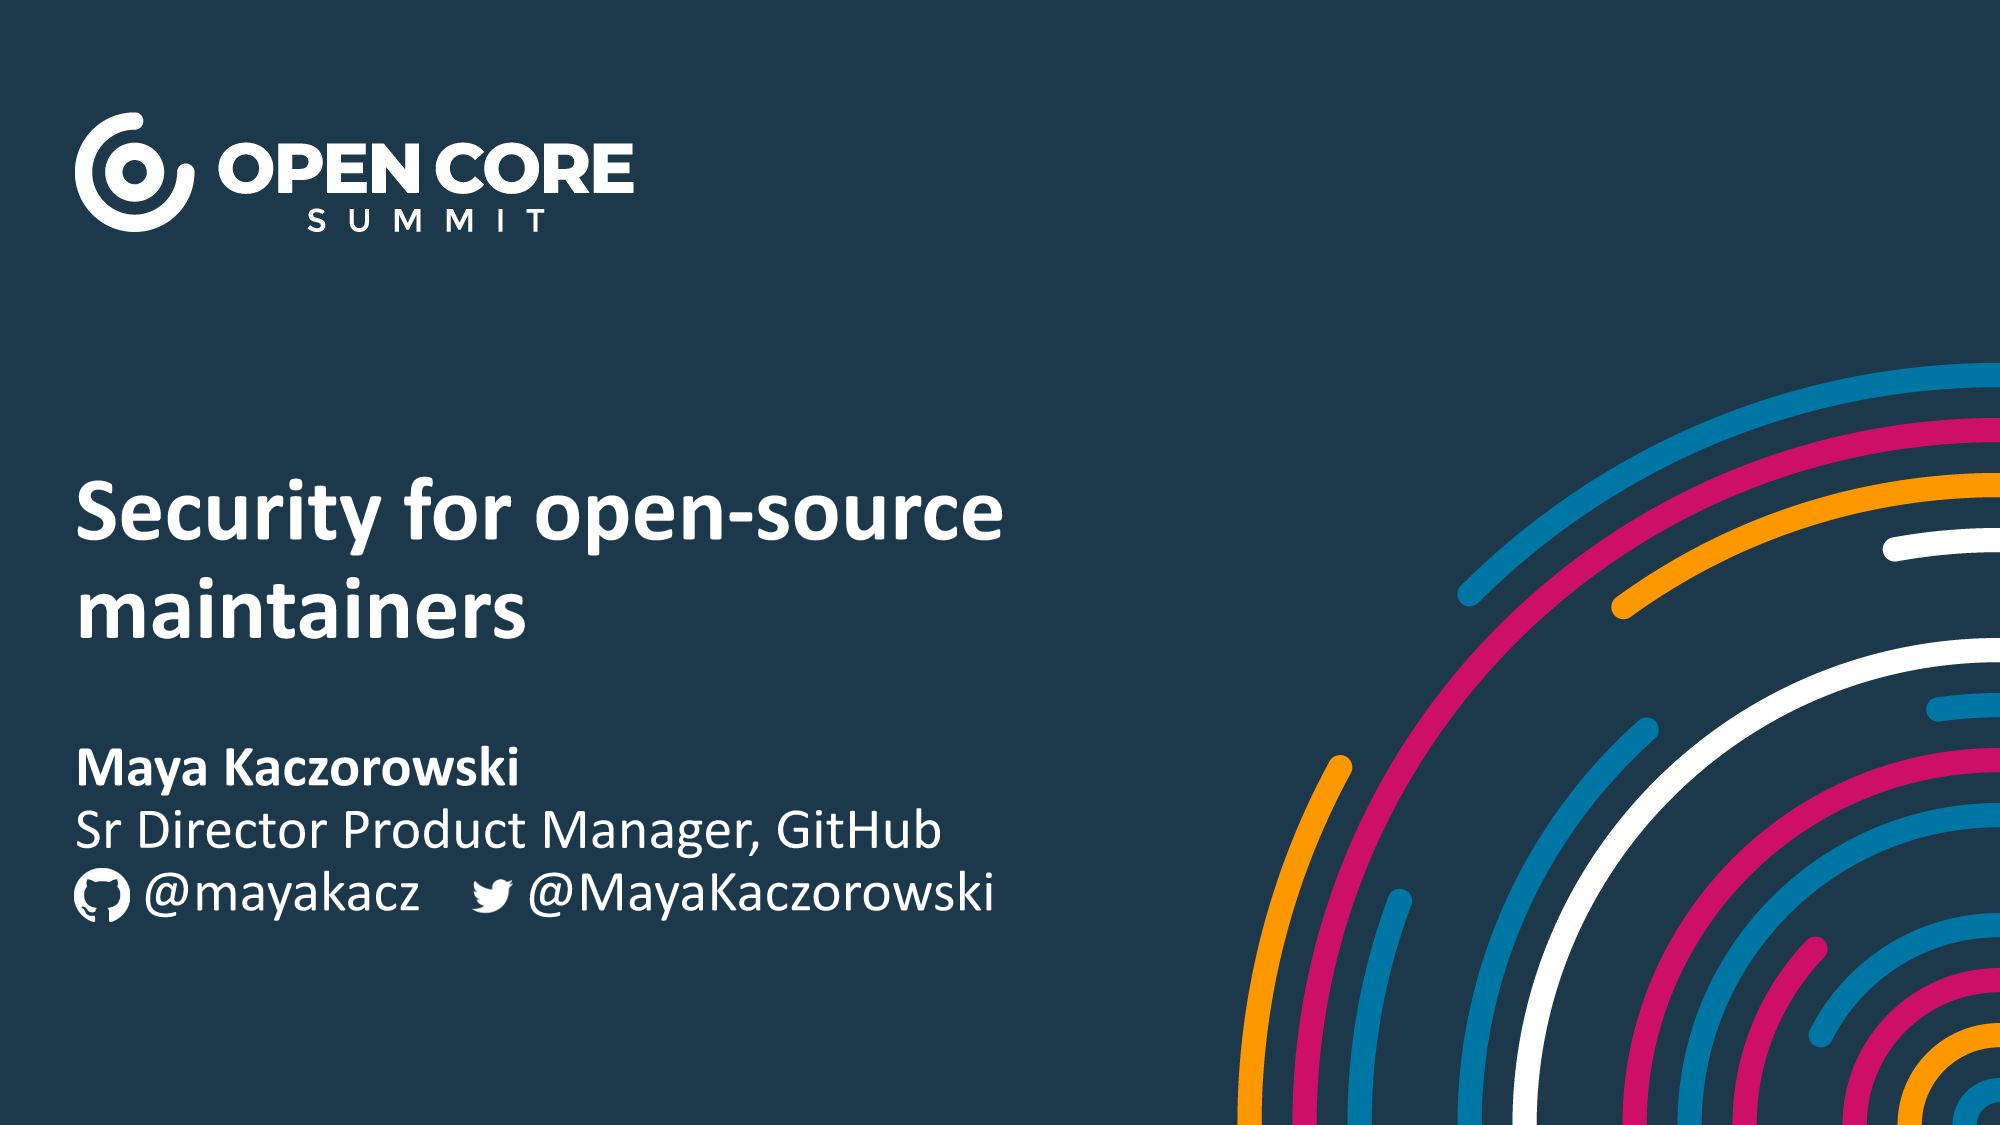 Open Core Summit 2020 | Security for open-source maintainers